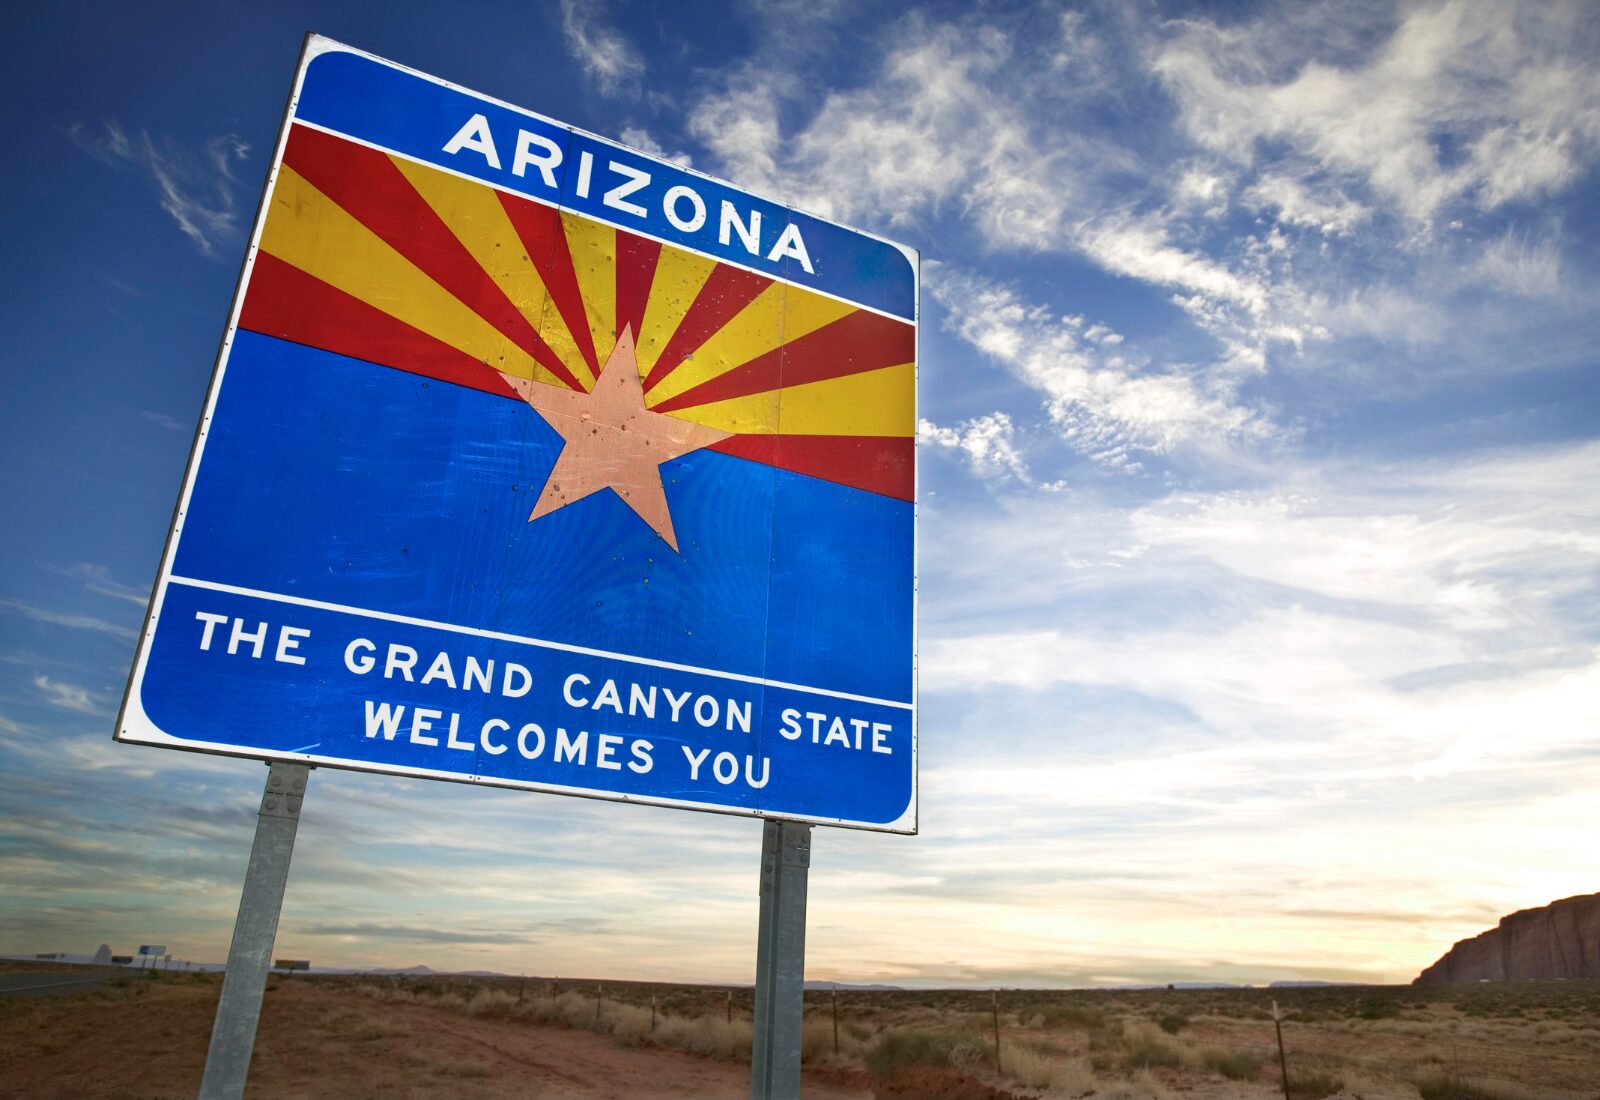 Arizona Cannabis: From Social Equity Approval to Corporate Cannabis